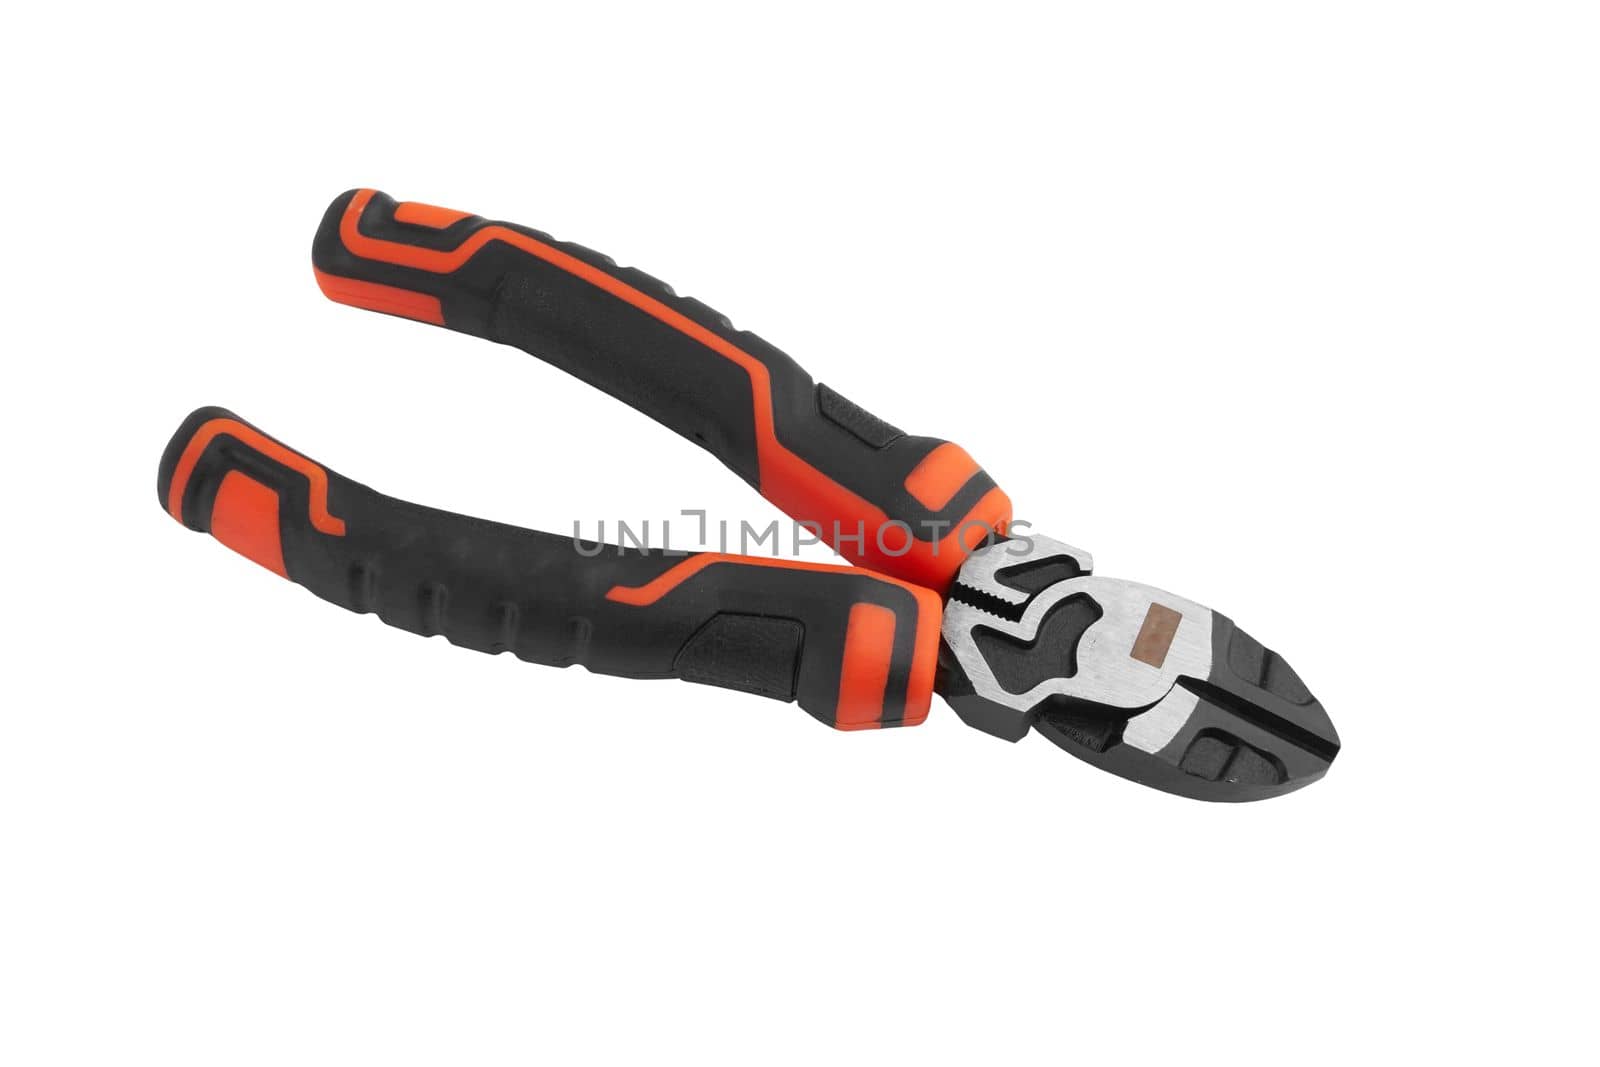 Wire cutter pliers by pioneer111